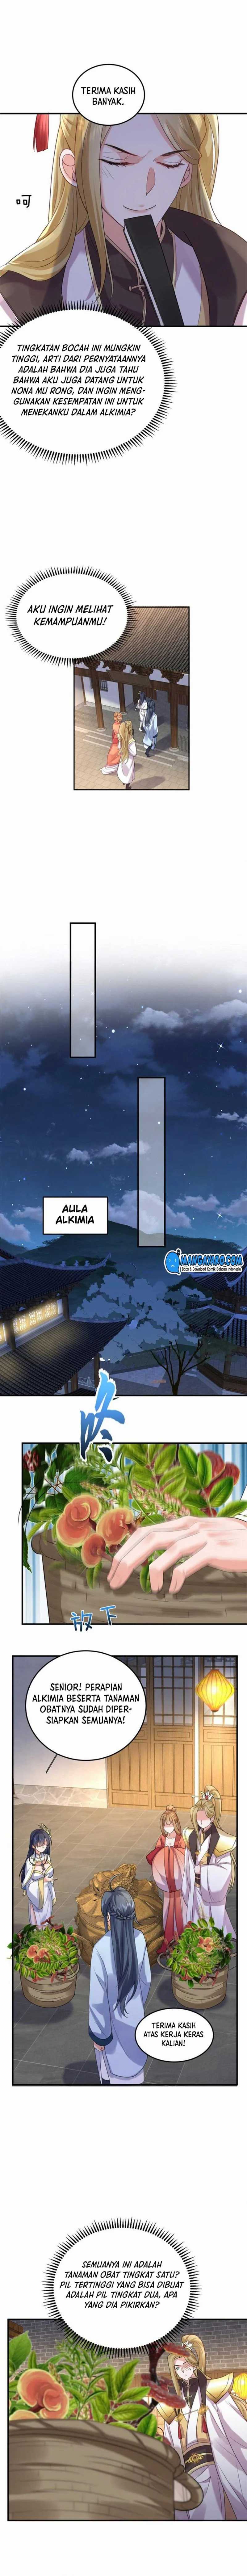 Am I Invincible Chapter 85